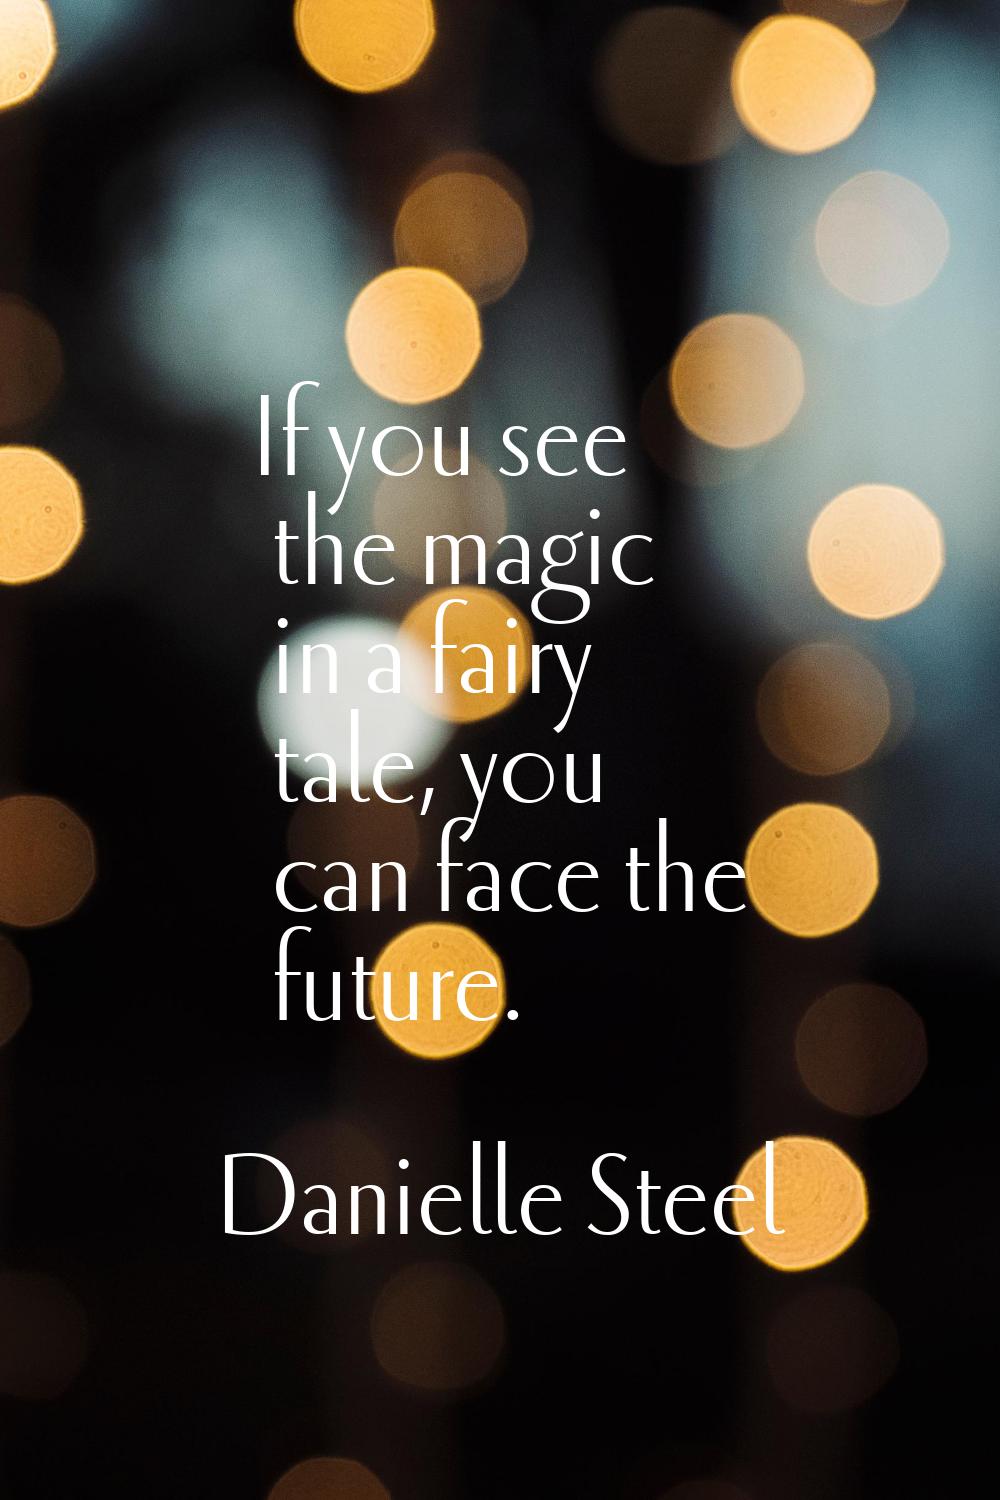 If you see the magic in a fairy tale, you can face the future.